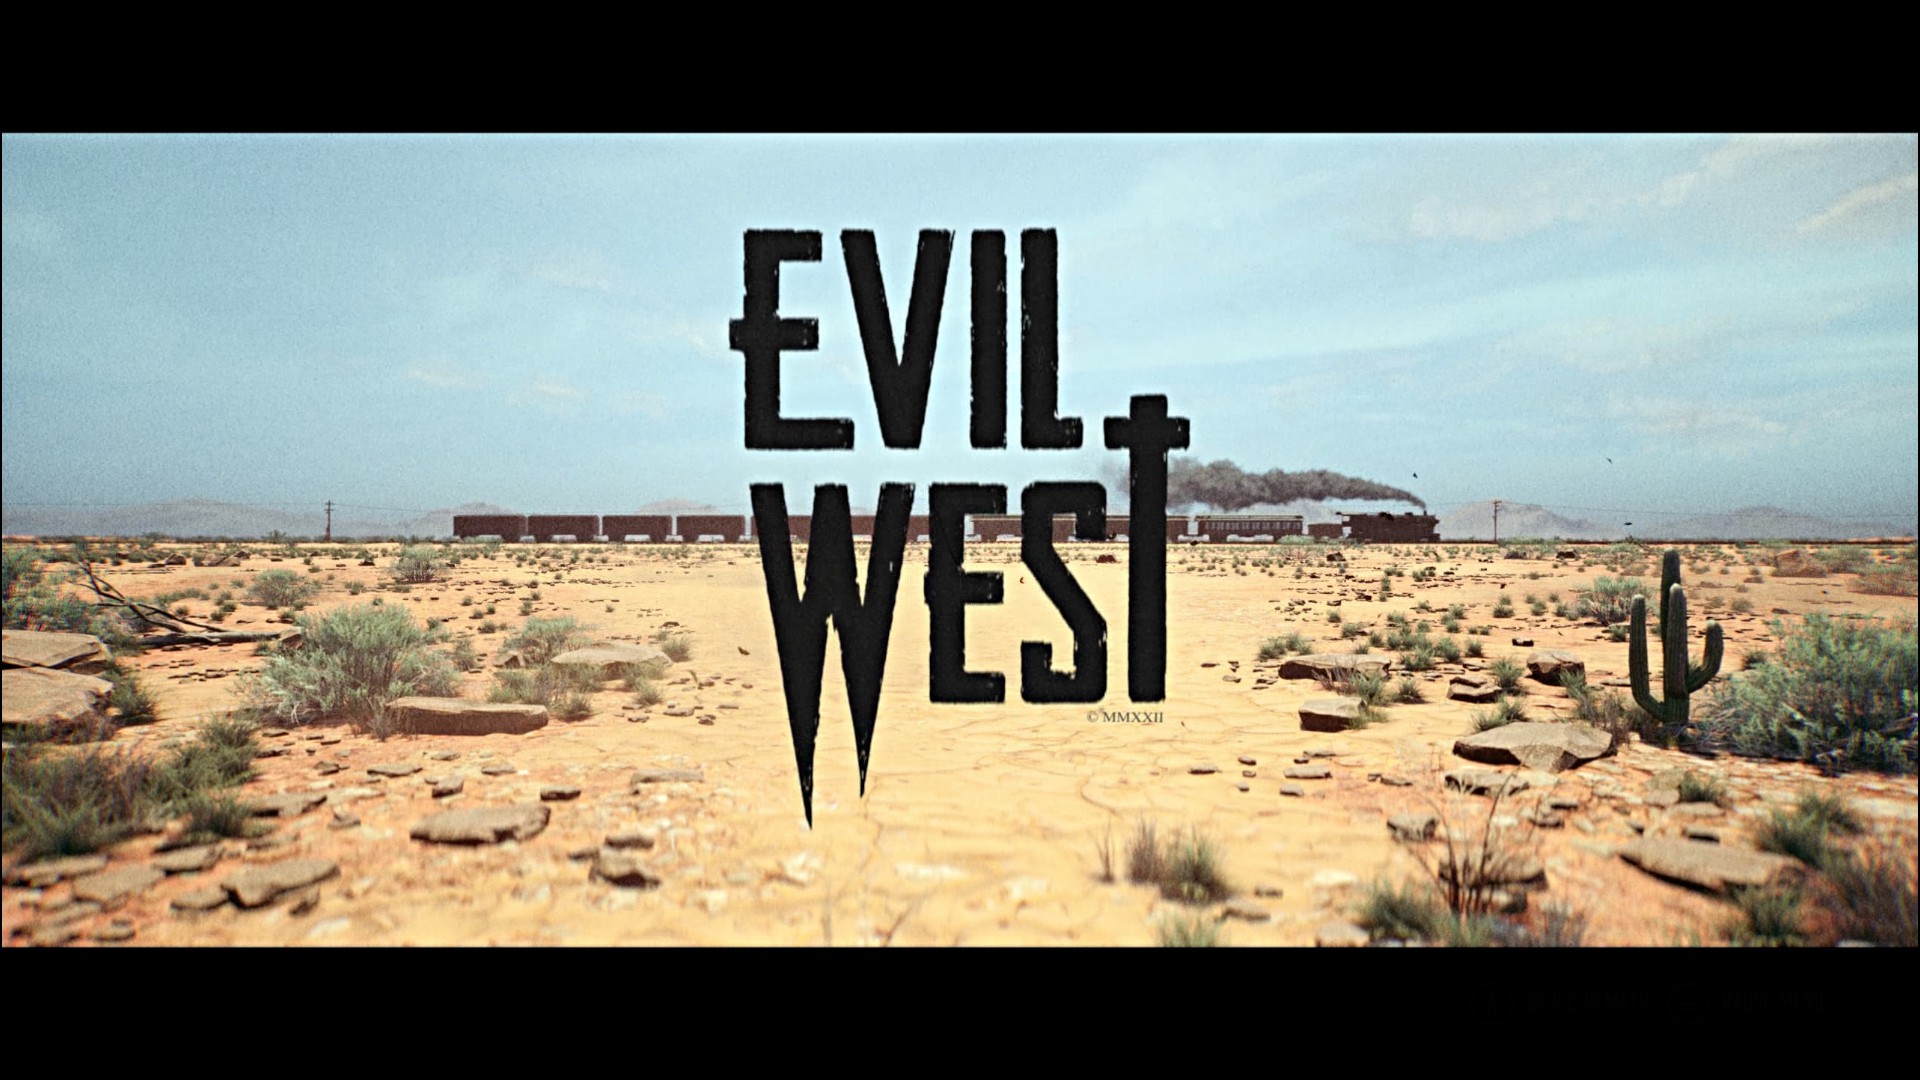 Evil West Review (PlayStation 5)